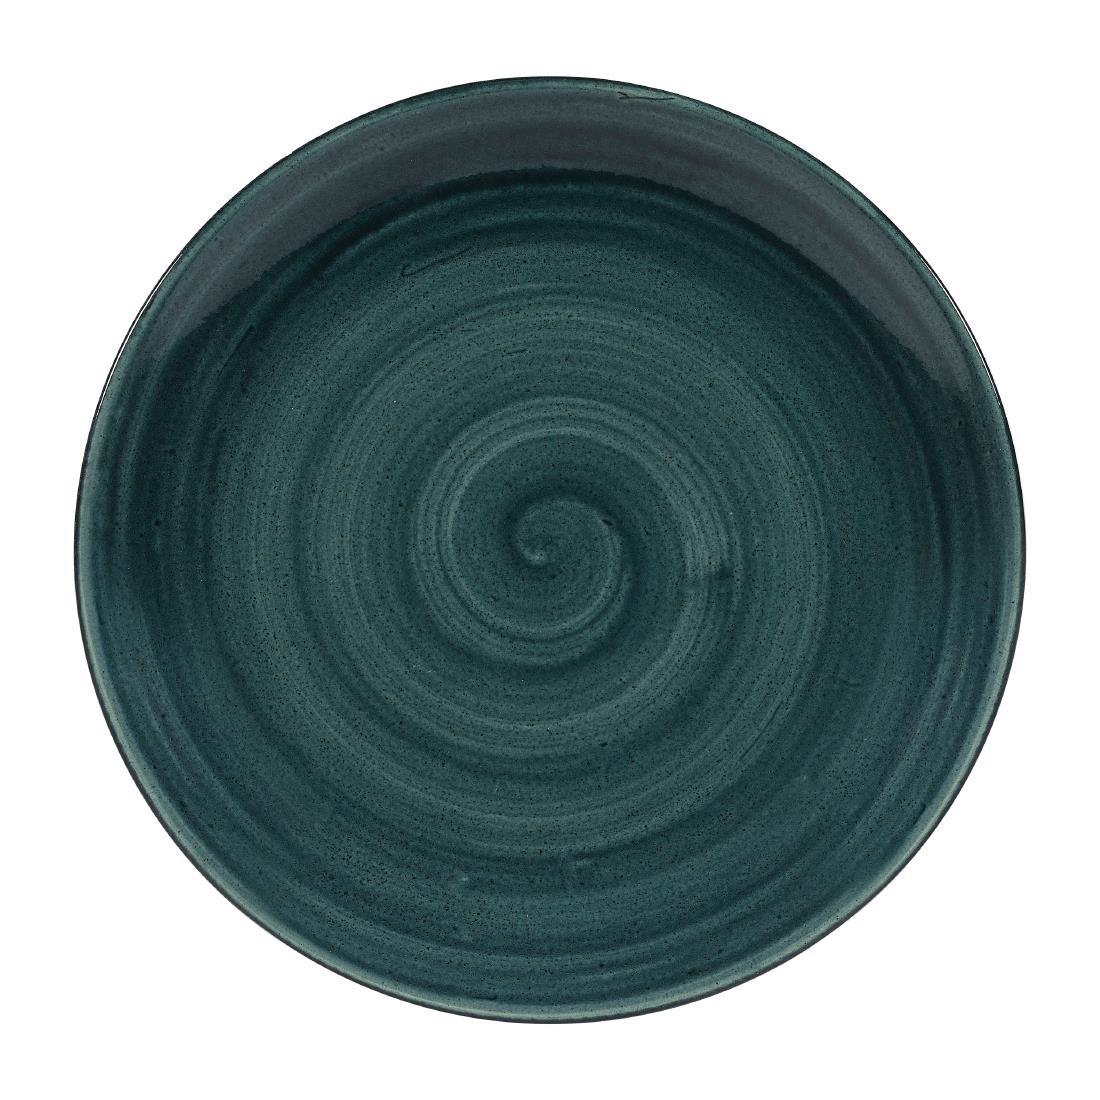 Churchill Stonecast Patina Coupe Plates Rustic Teal 260mm (Pack of 12) - FA590  - 1